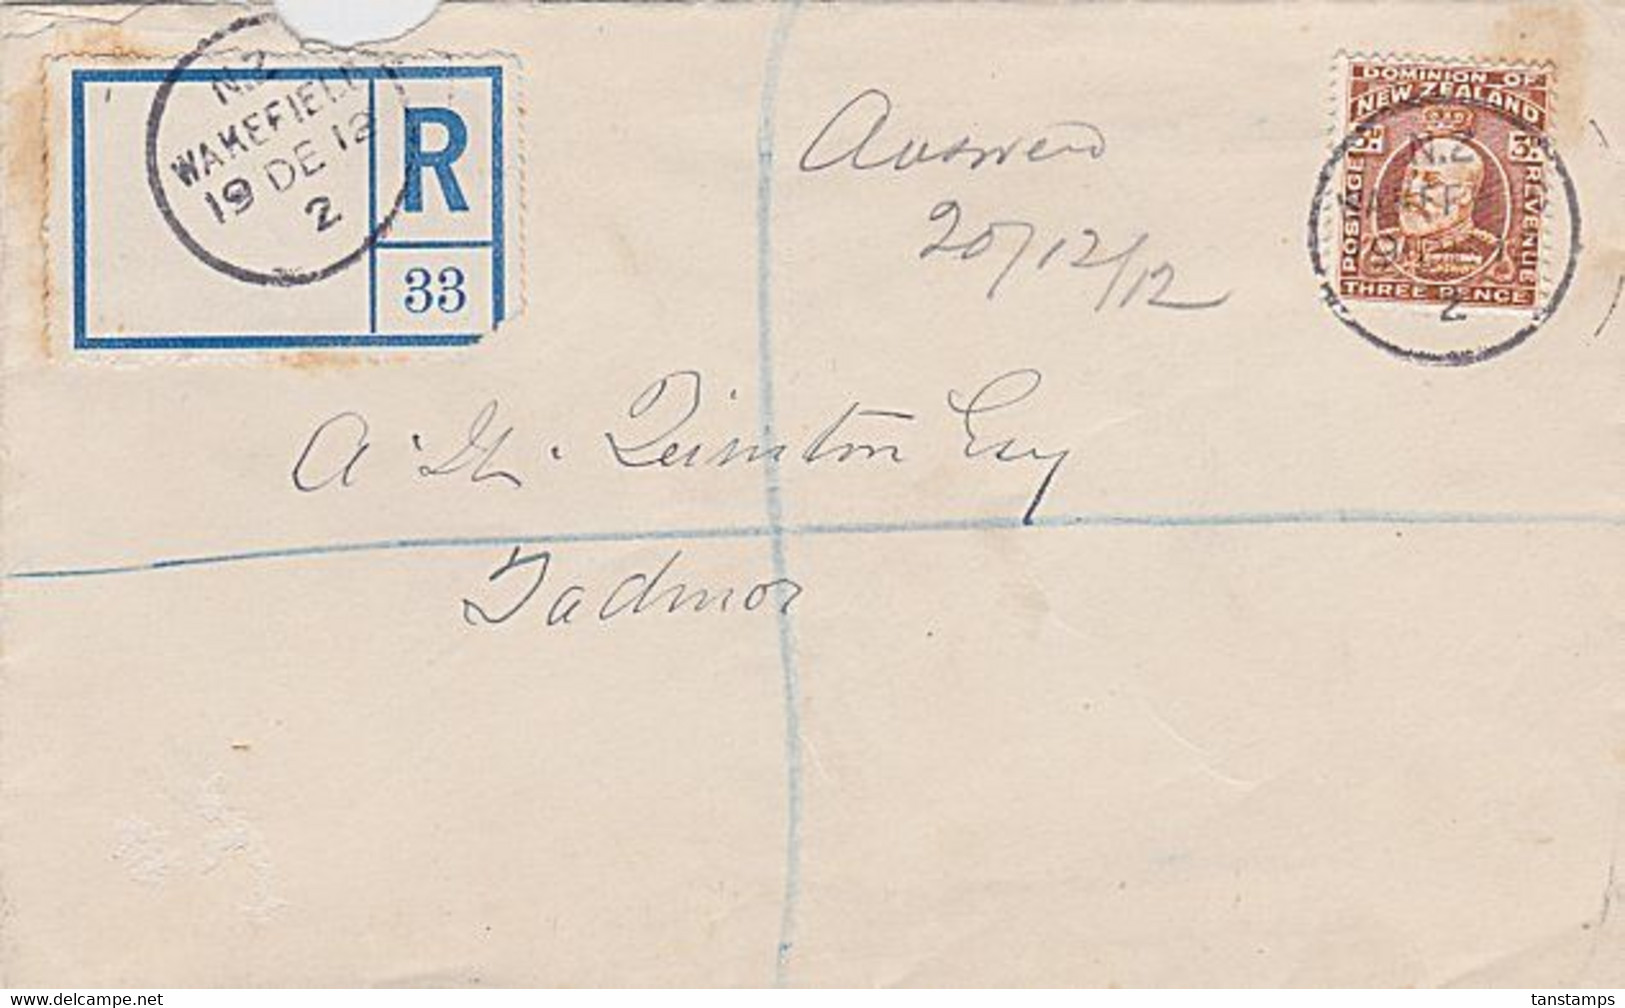 NEW ZEALAND 1912 REGISTERED COVER 3d KEVII SOLO FRANKING WAKEFIELD A-CLASS CDS - Briefe U. Dokumente